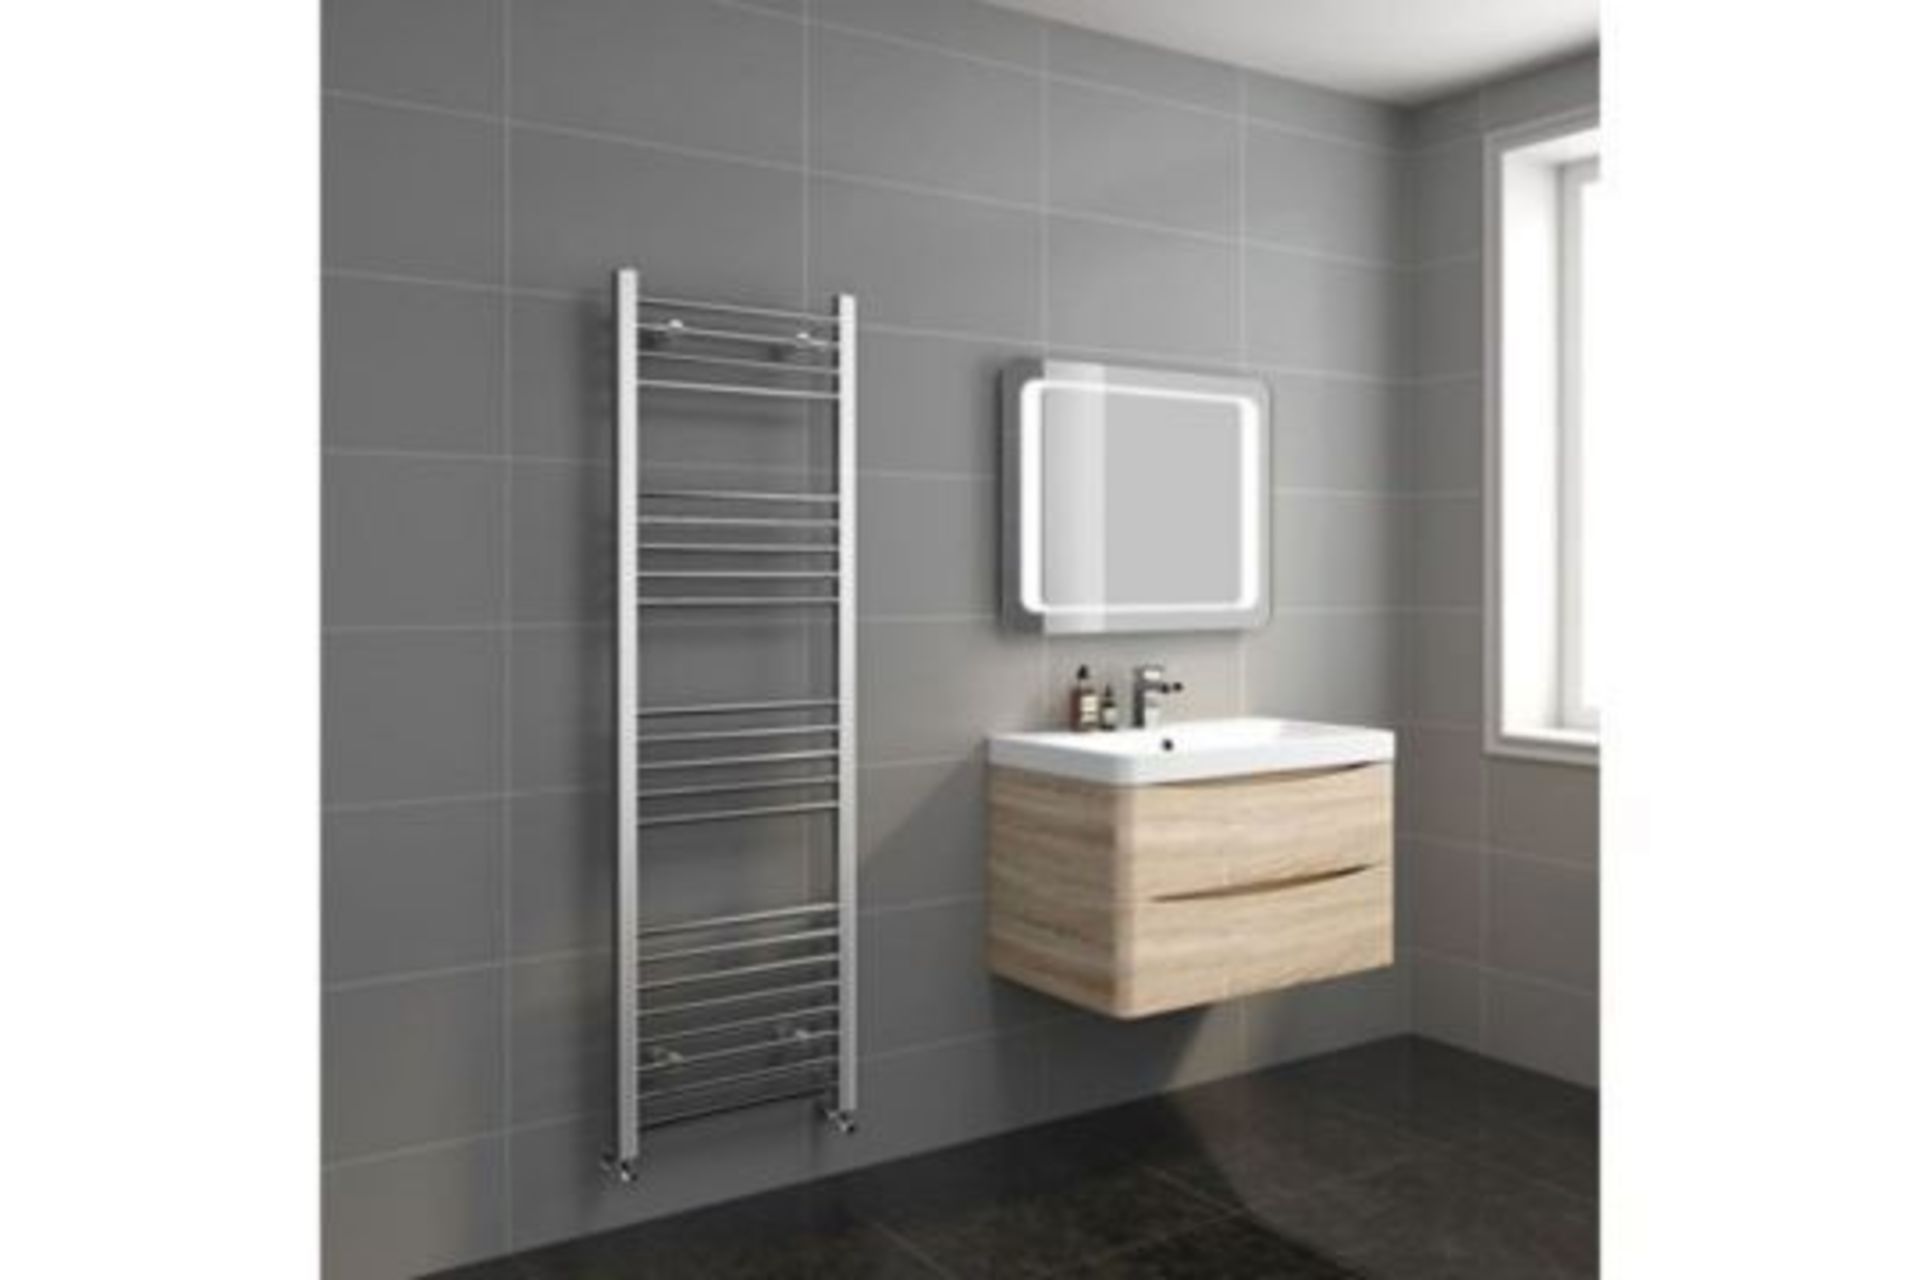 New &Boxed 1600x500mm - 20mm Tubes - Chrome Heated Straight Rail Ladder Towel Radiator. Ns1600... - Image 2 of 2